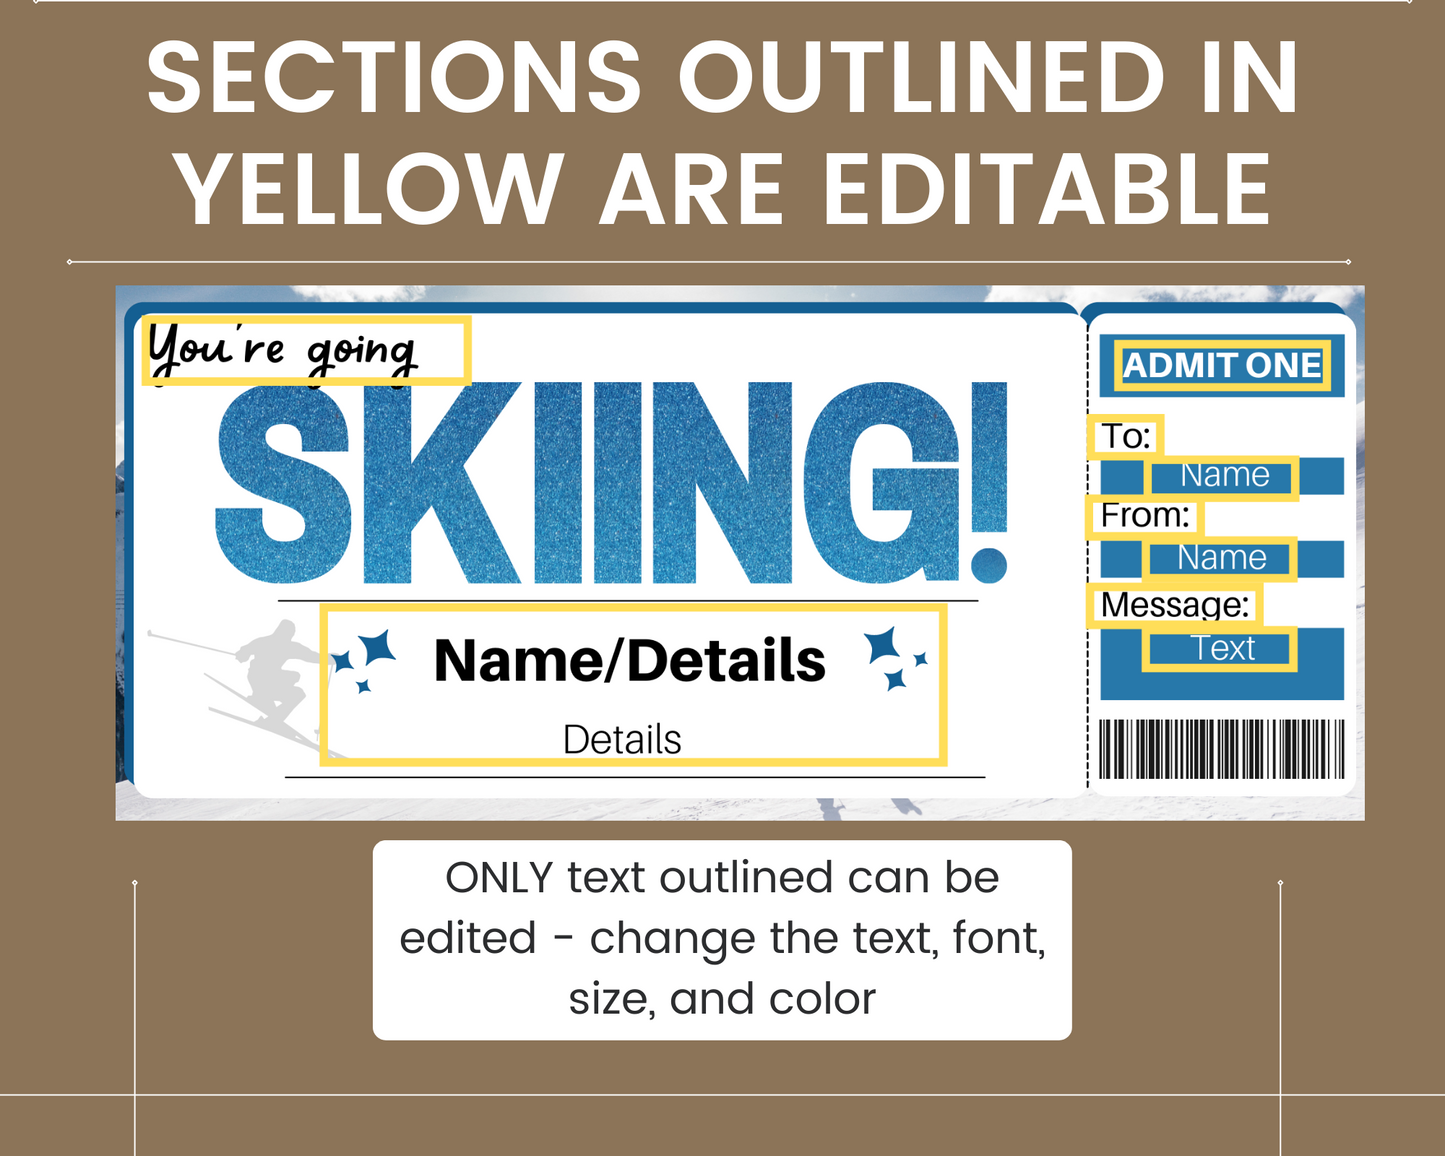 Skiing Gift Ticket Template